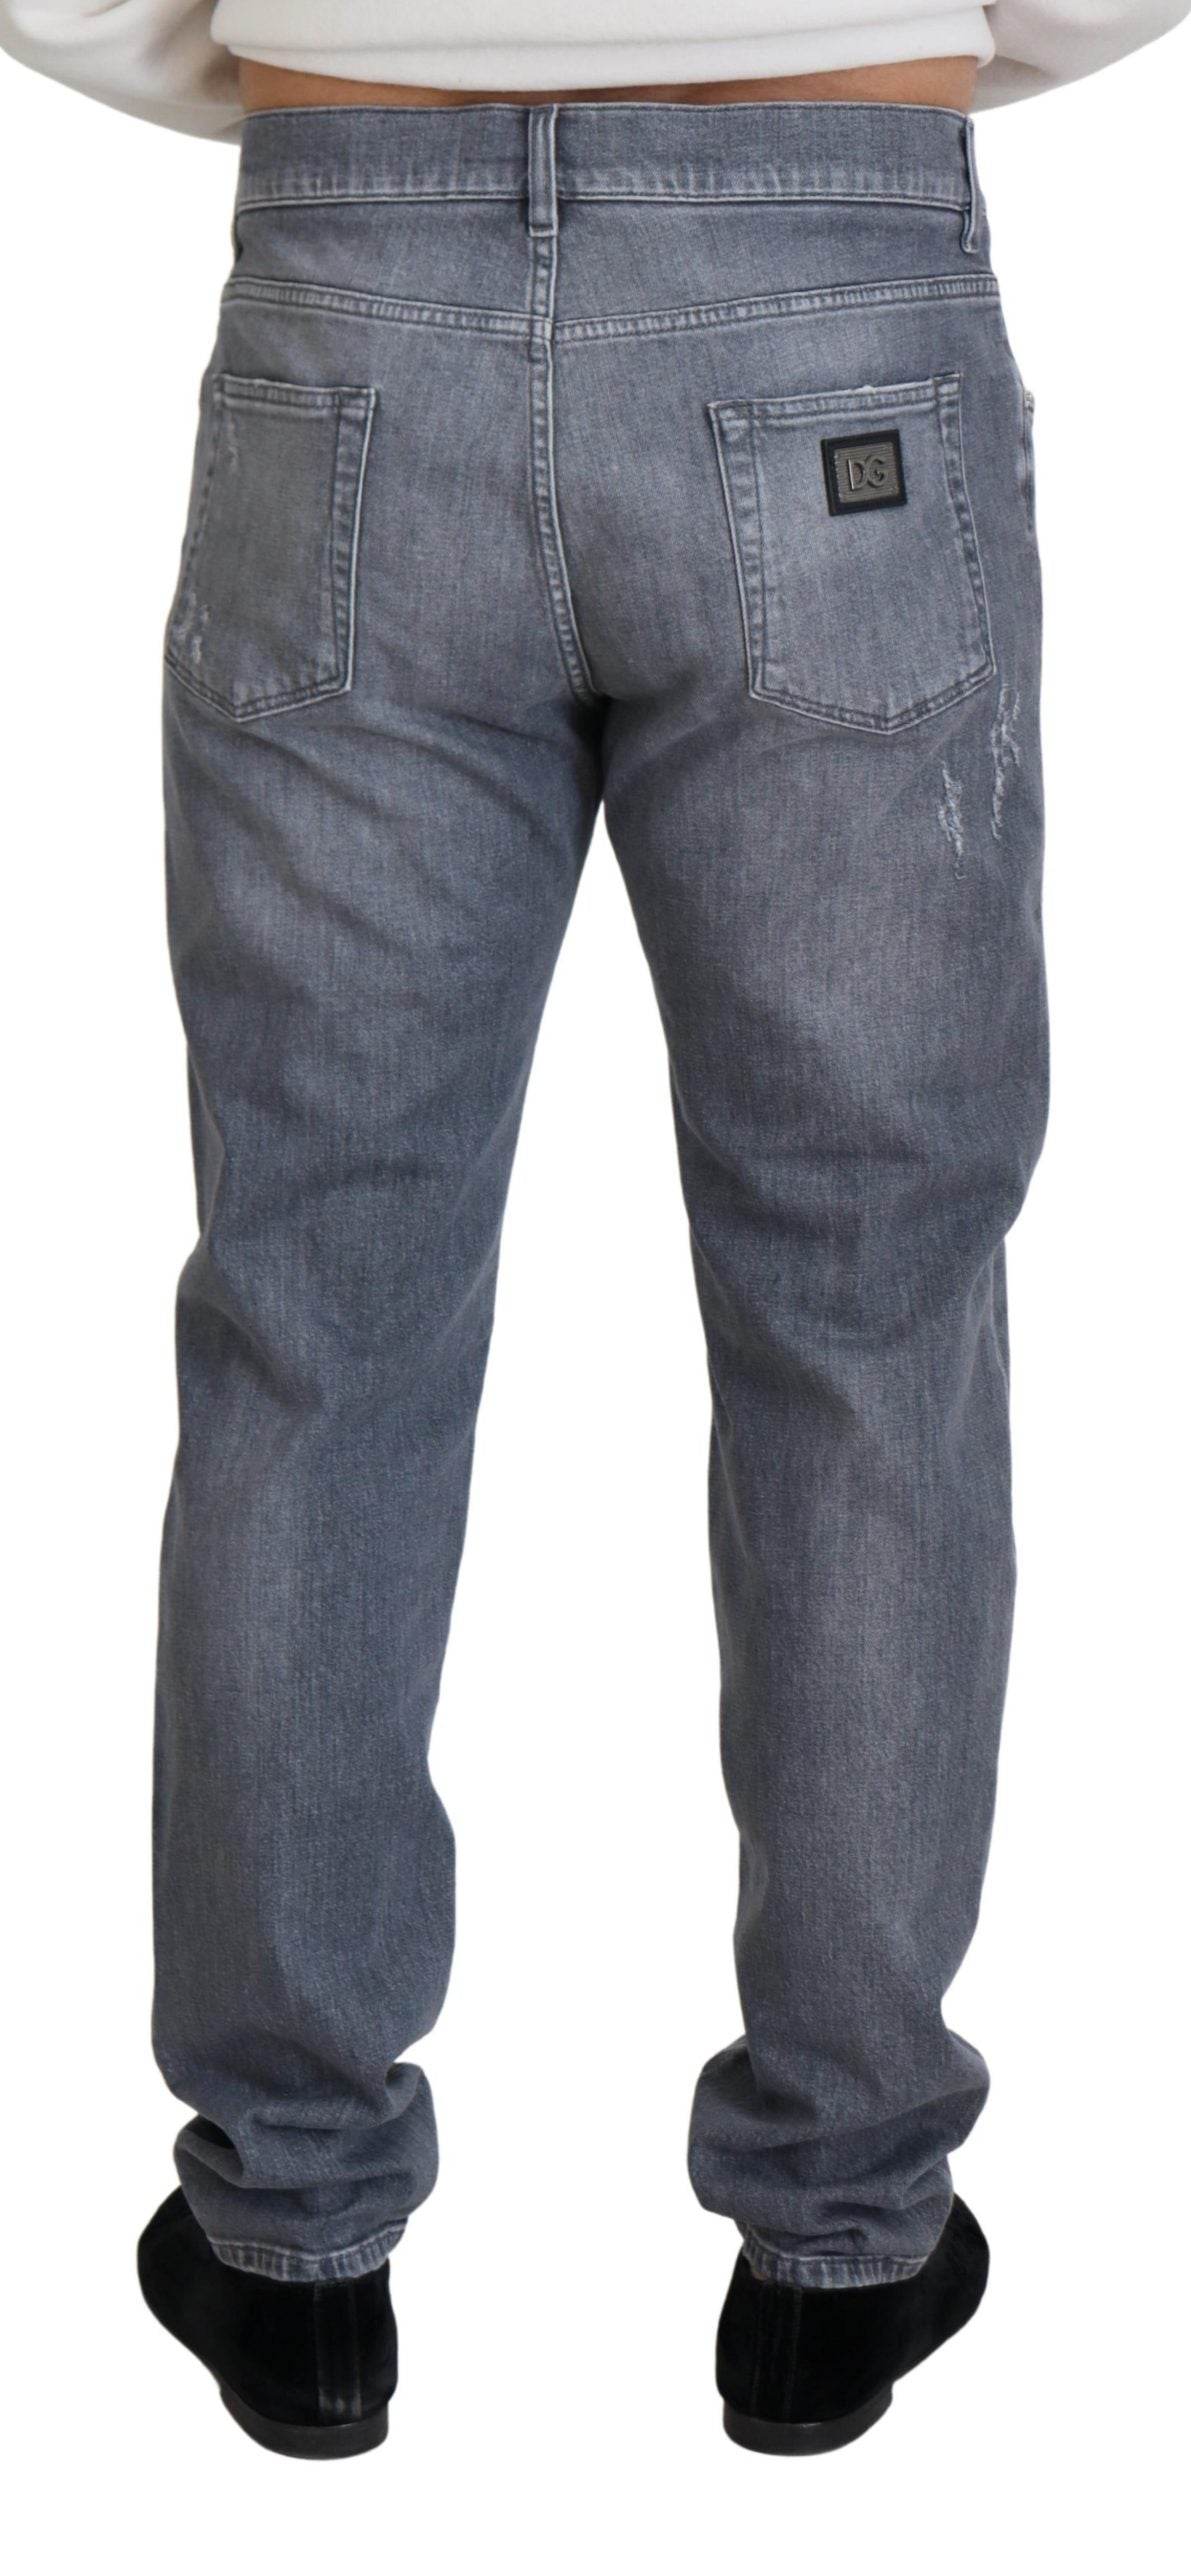 Grey Washed Cotton Casual Denim Jeans